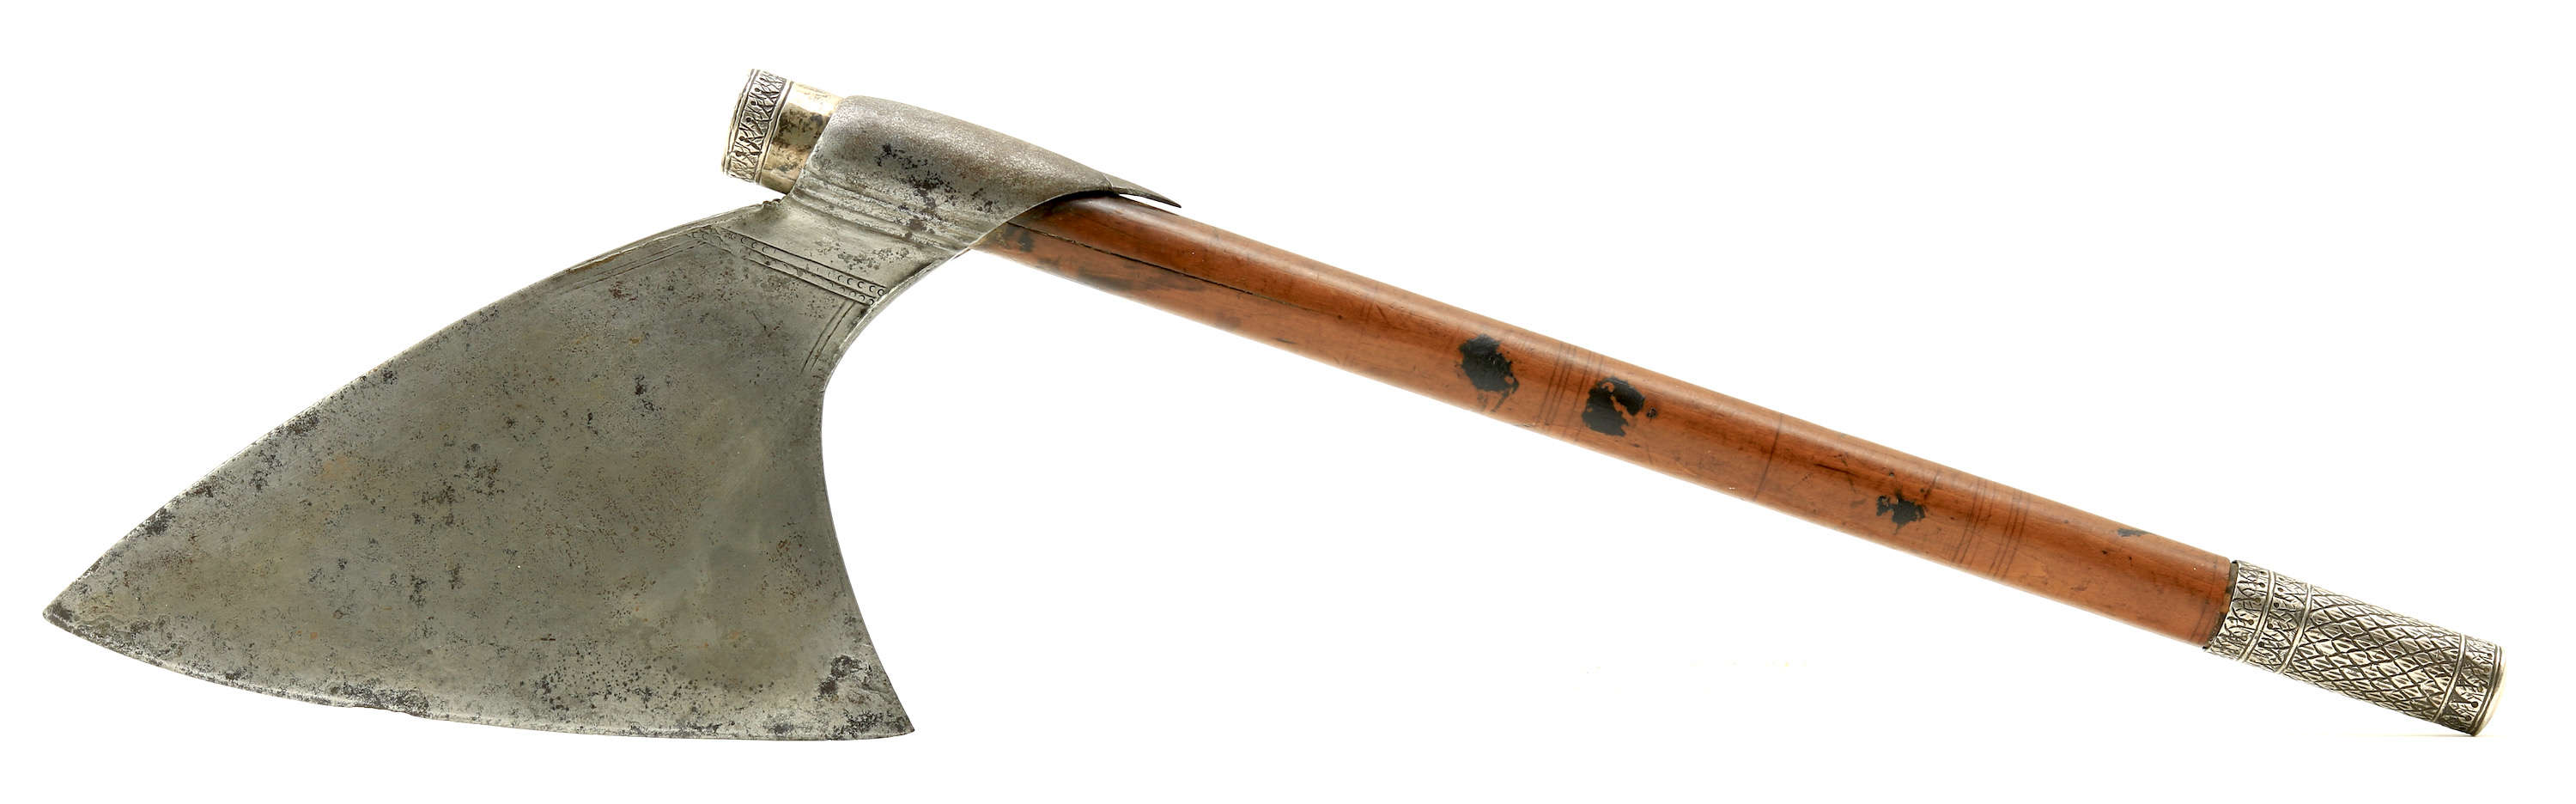 South Indian tungi axe overall